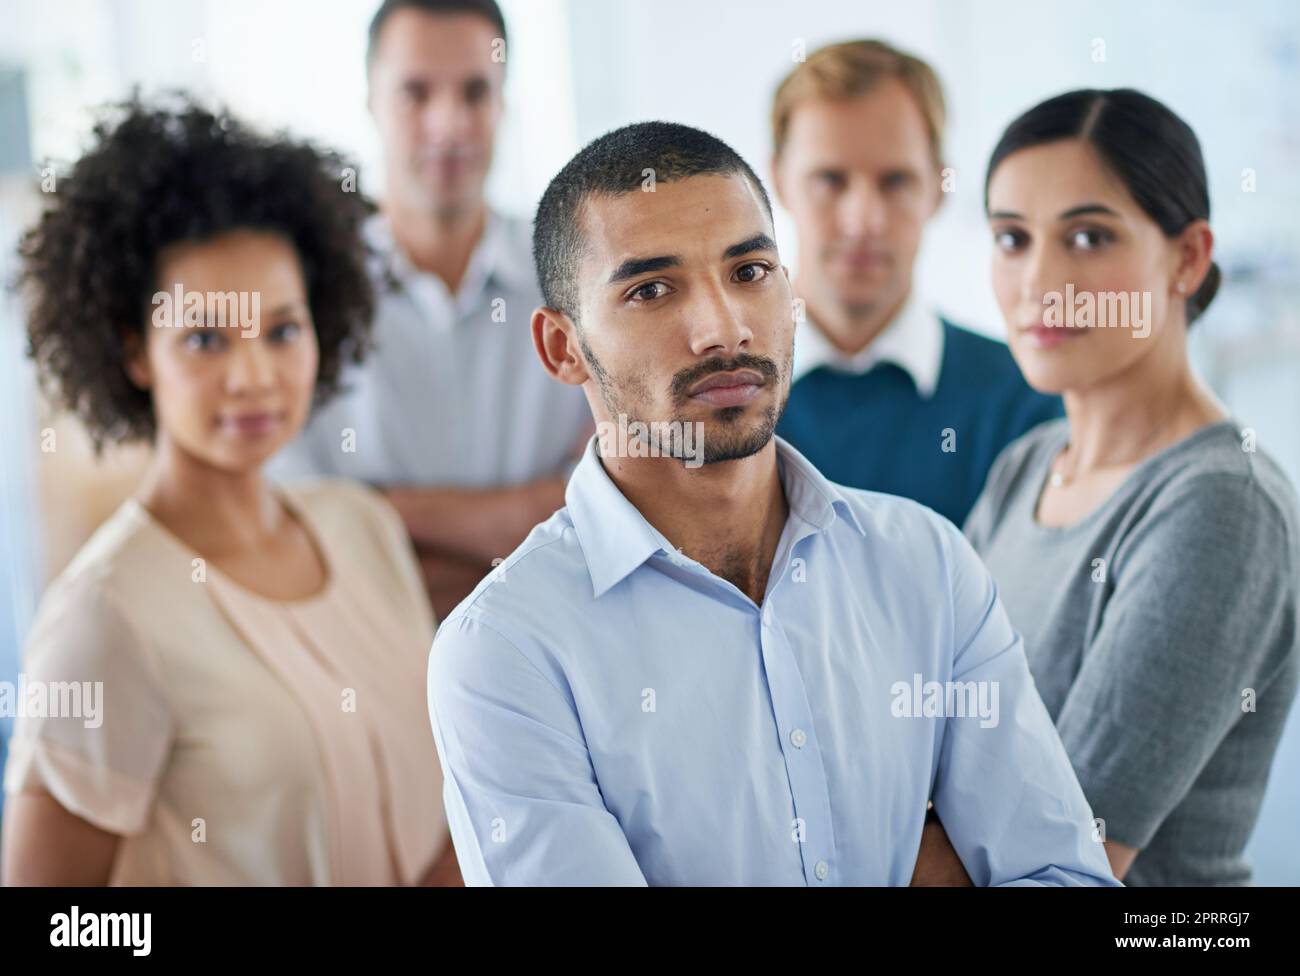 Success is the only option. Portrait of a group of diverse colleagues standing in an office. Stock Photo